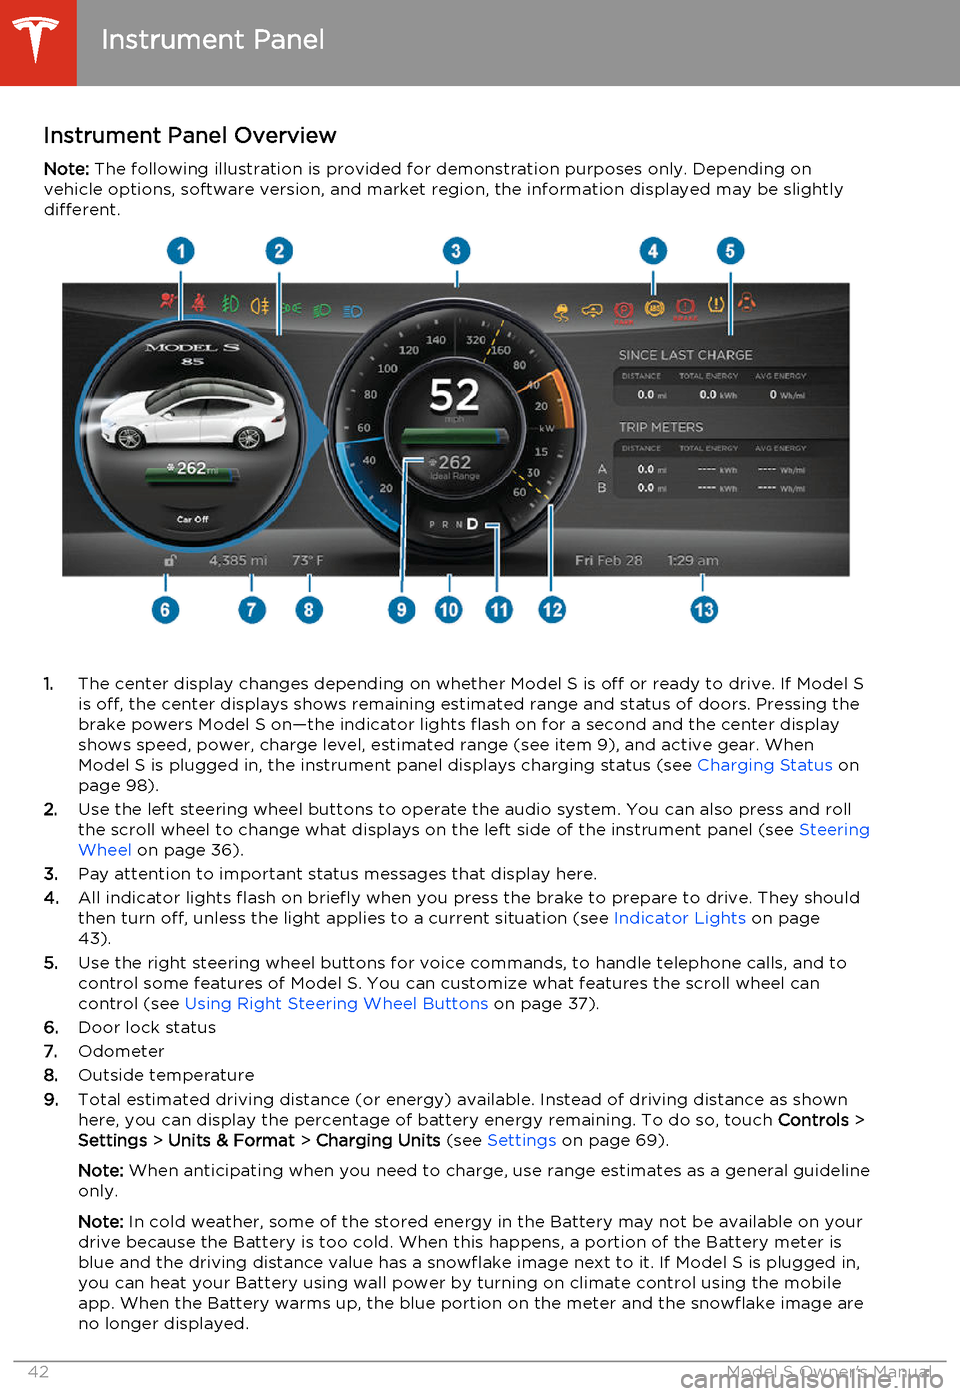 TESLA MODEL S 2014   (North America) Service Manual Instrument Panel OverviewNote:  The following illustration is provided for demonstration purposes only. Depending on
vehicle options, software version, and market region, the information displayed may